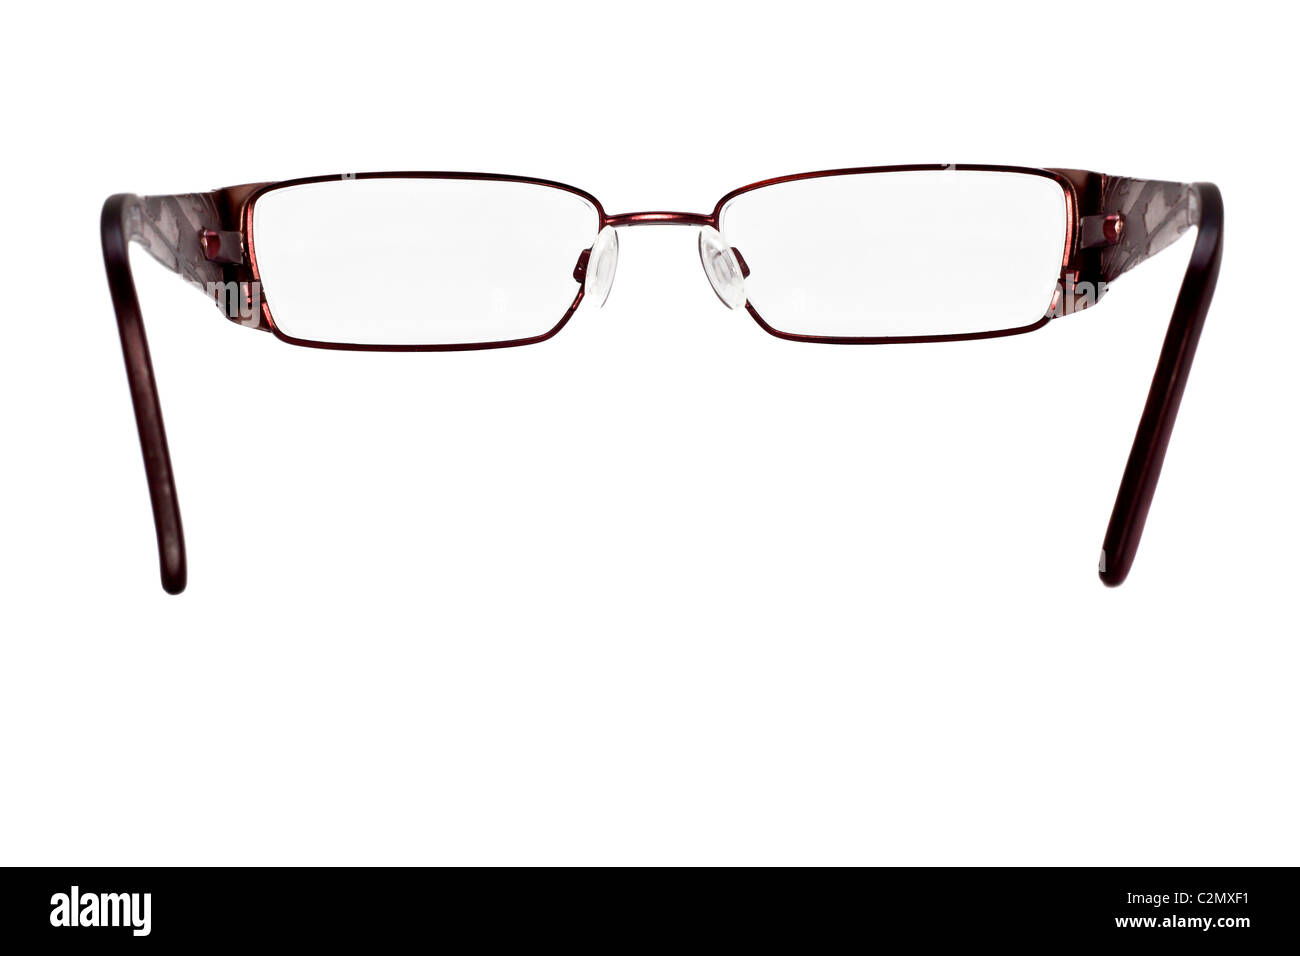 A pair of eye glasses on a white background Stock Photo